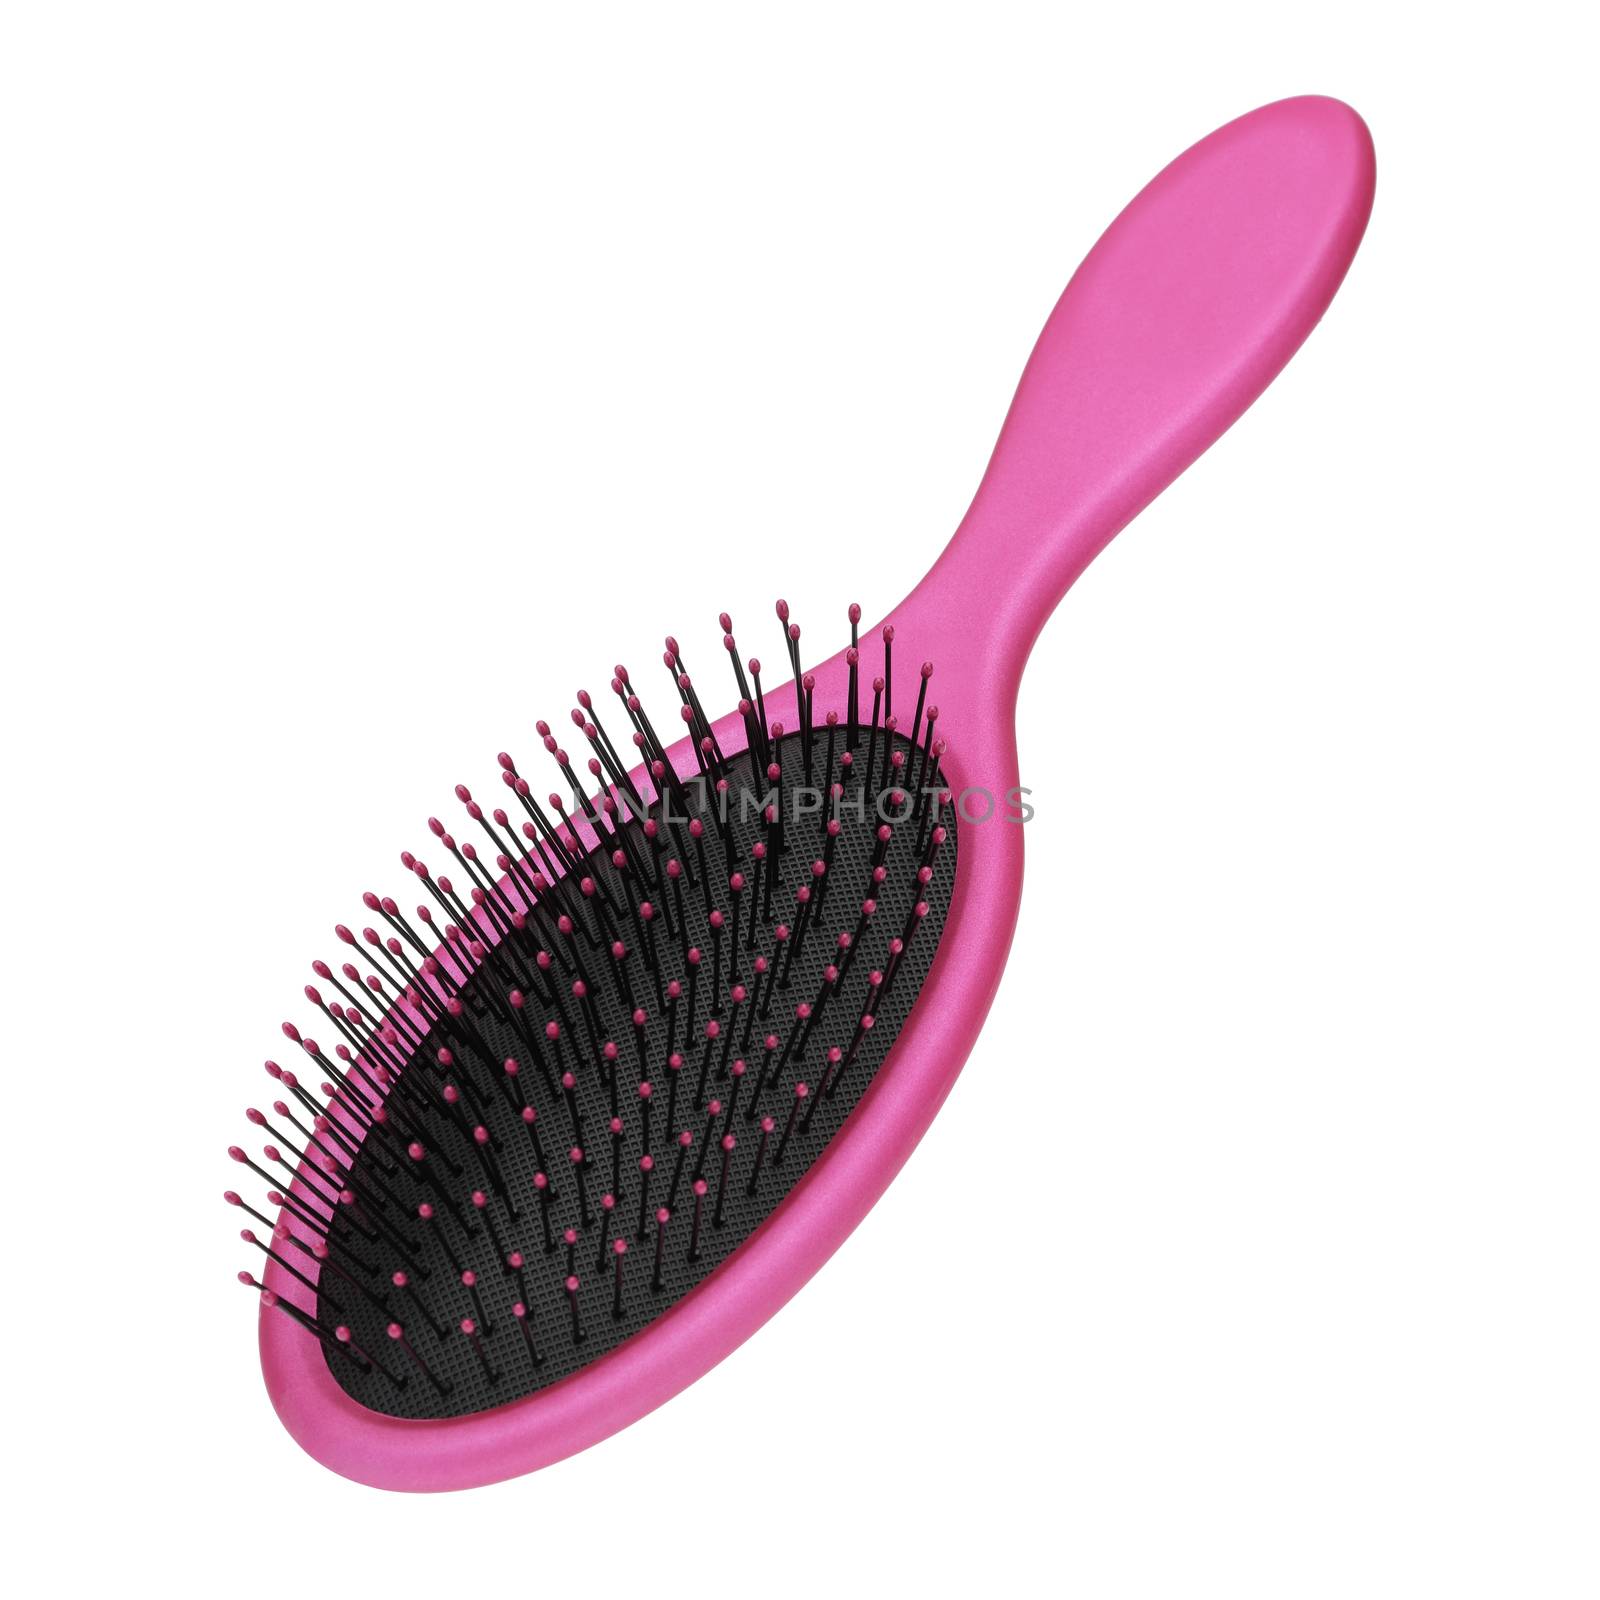 Pink hair brush by VivacityImages